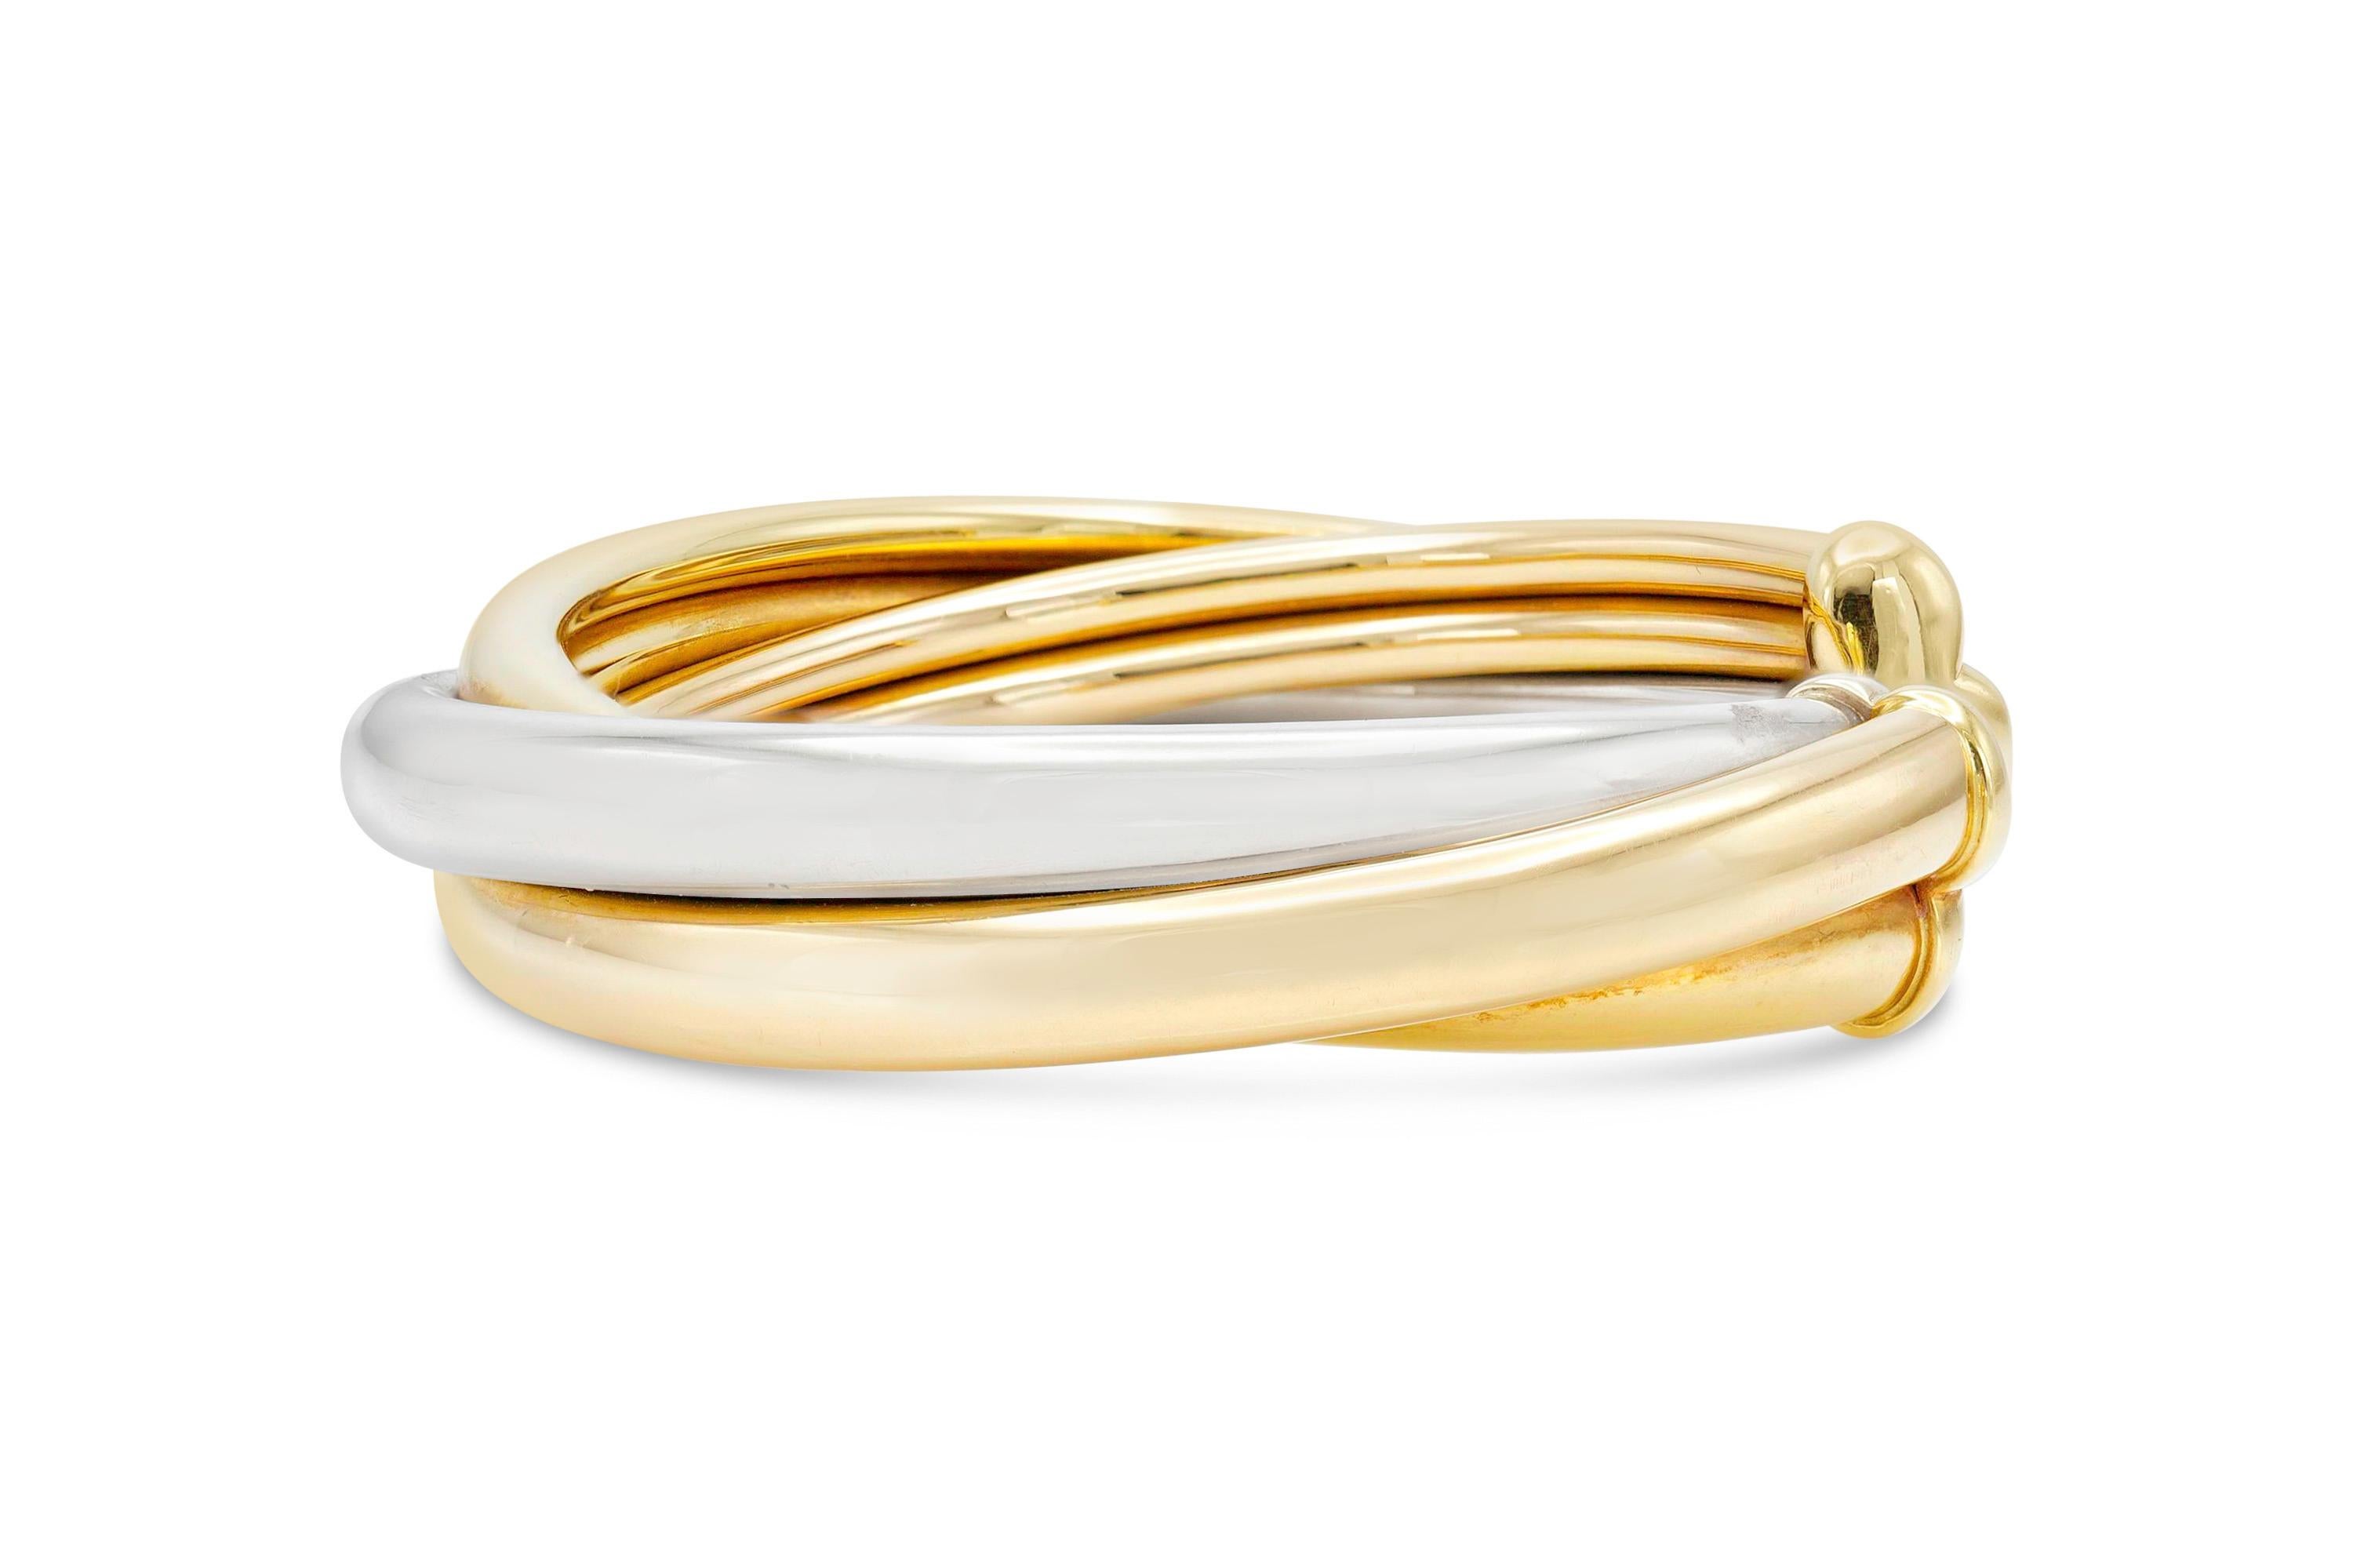 Finely crafted in 18k tri-tone gold.
Signed and numbered by Cartier
Circa 1992
Size 7